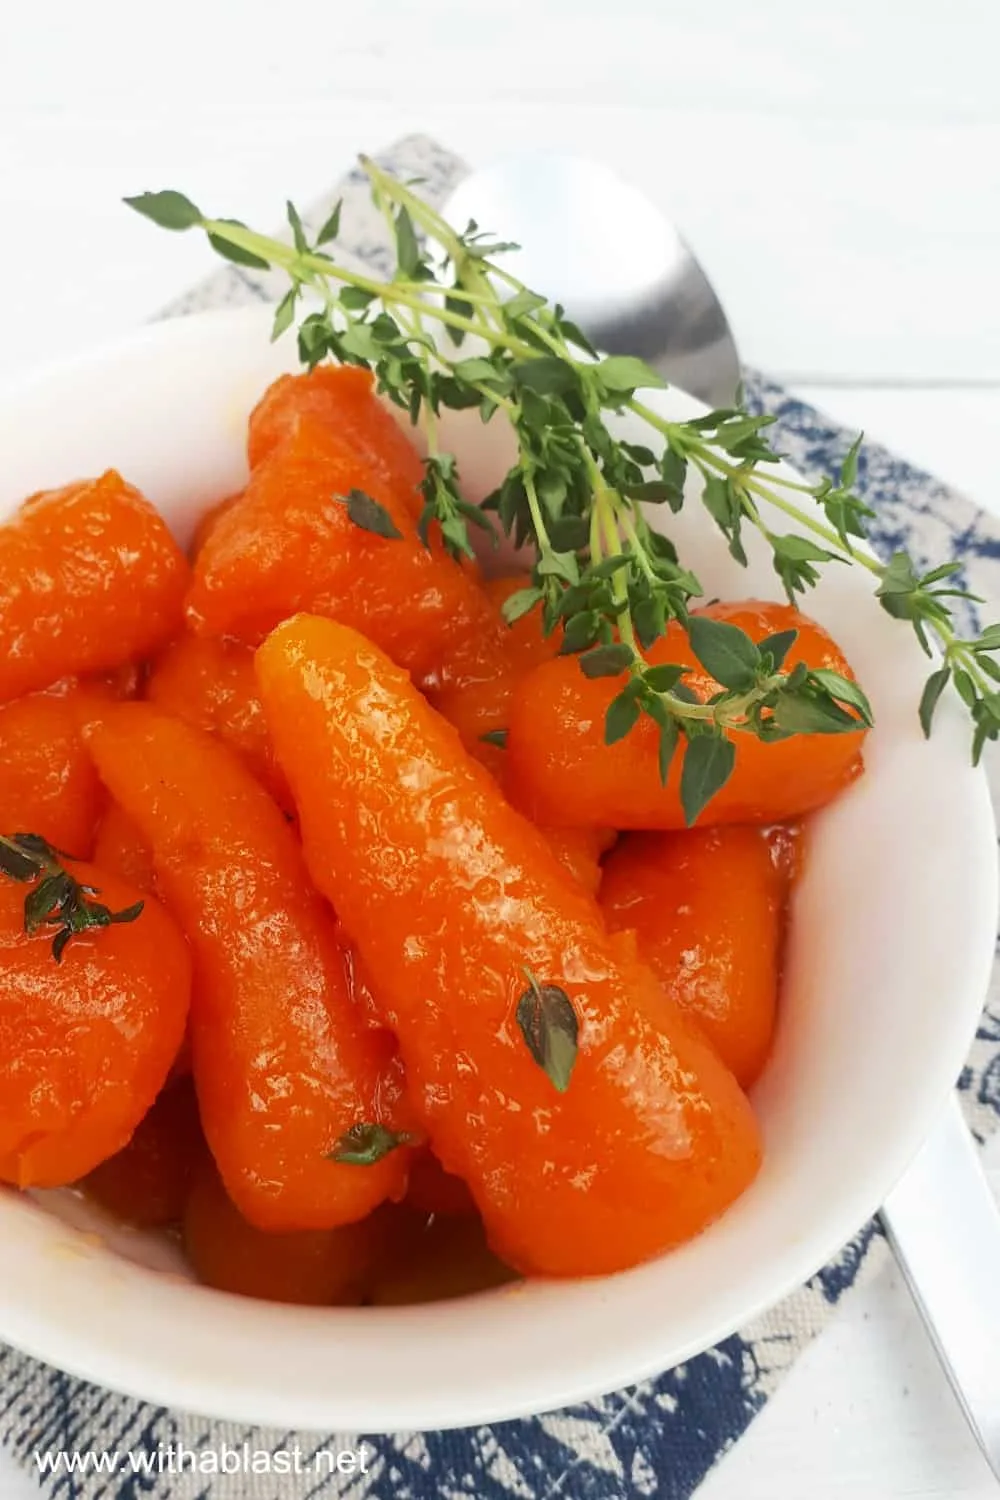 Orange Juice Glazed Carrots are sweet, sticky delicious and a must have side dish recipe, which goes well with any main dish. Quick and easy recipe and always a winner on any occasion